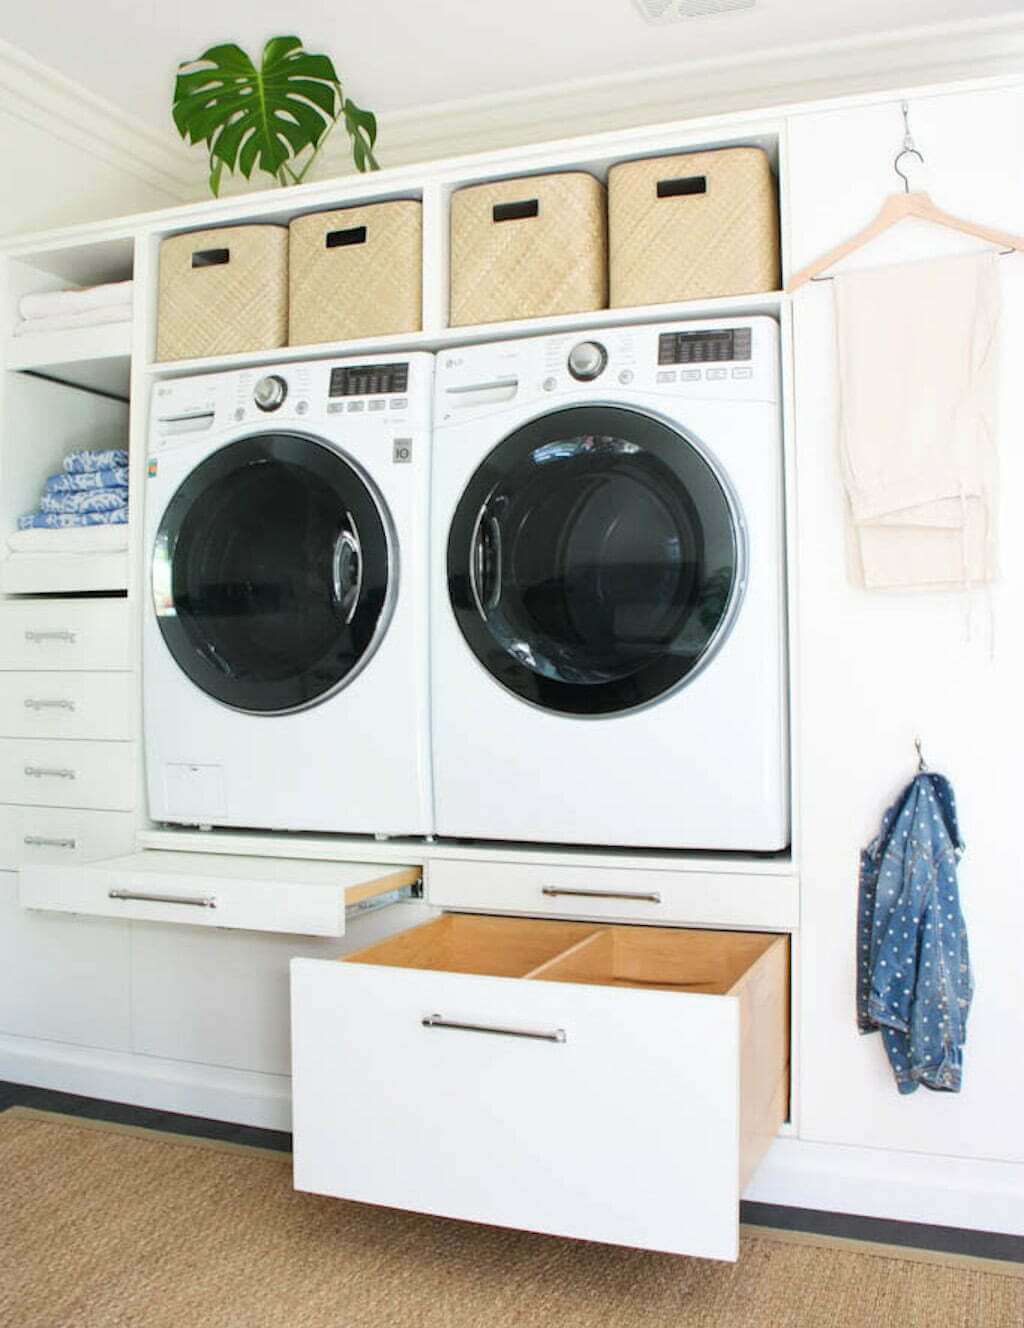 DIY laundry room makeover with organization and baskets and storage drawers under washer and dryer machines